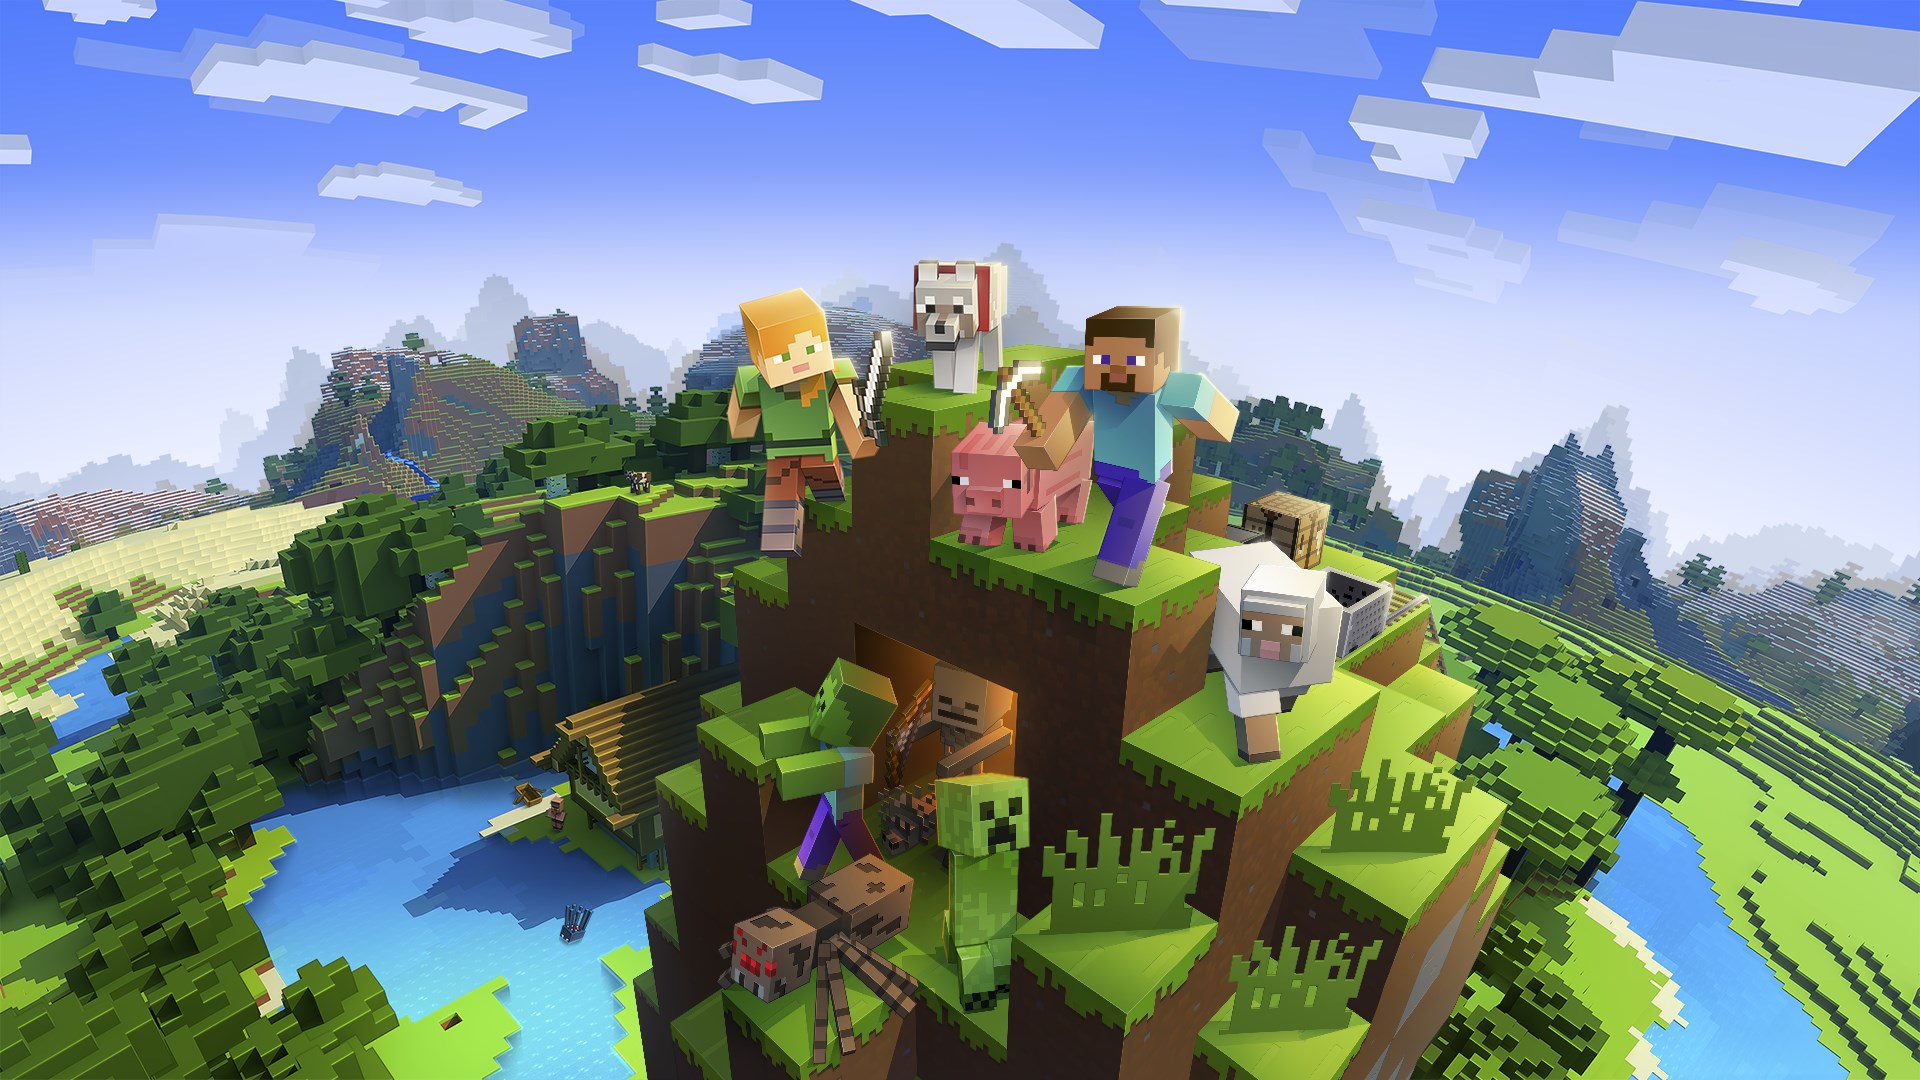 Lego game Minecraft now has 112 million monthly Active Players